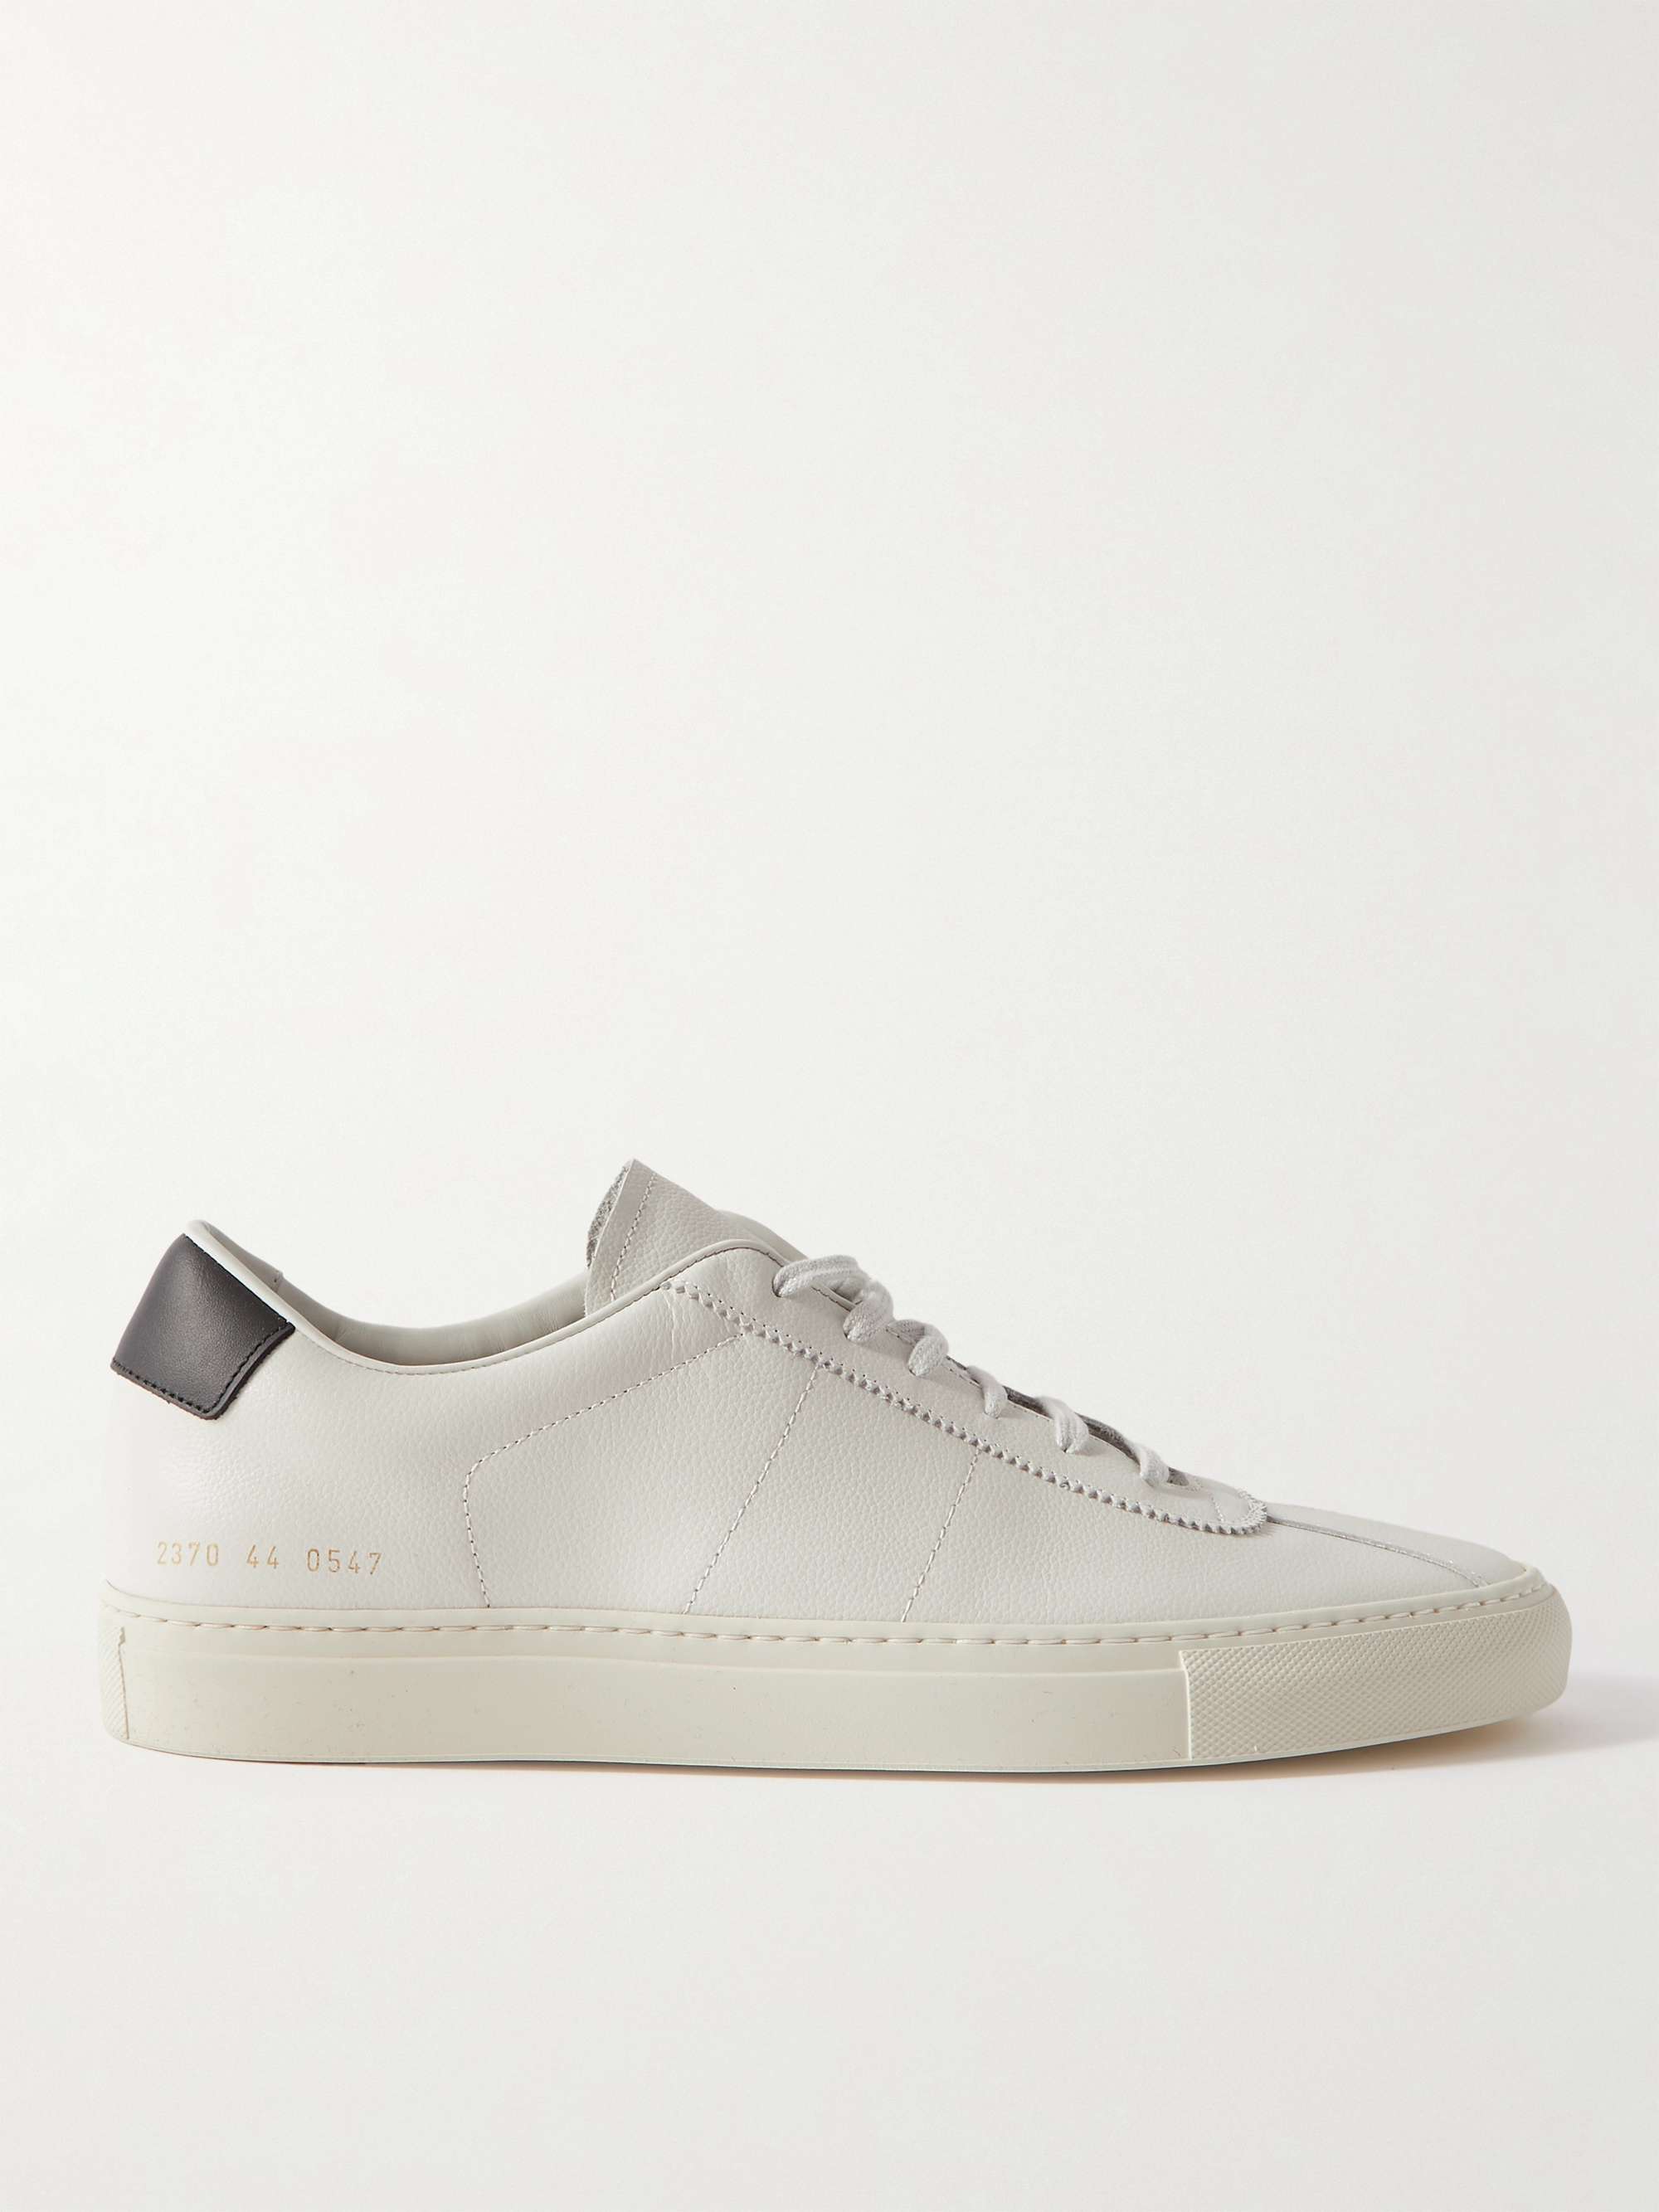 COMMON PROJECTS Tennis 77 Leather Sneakers